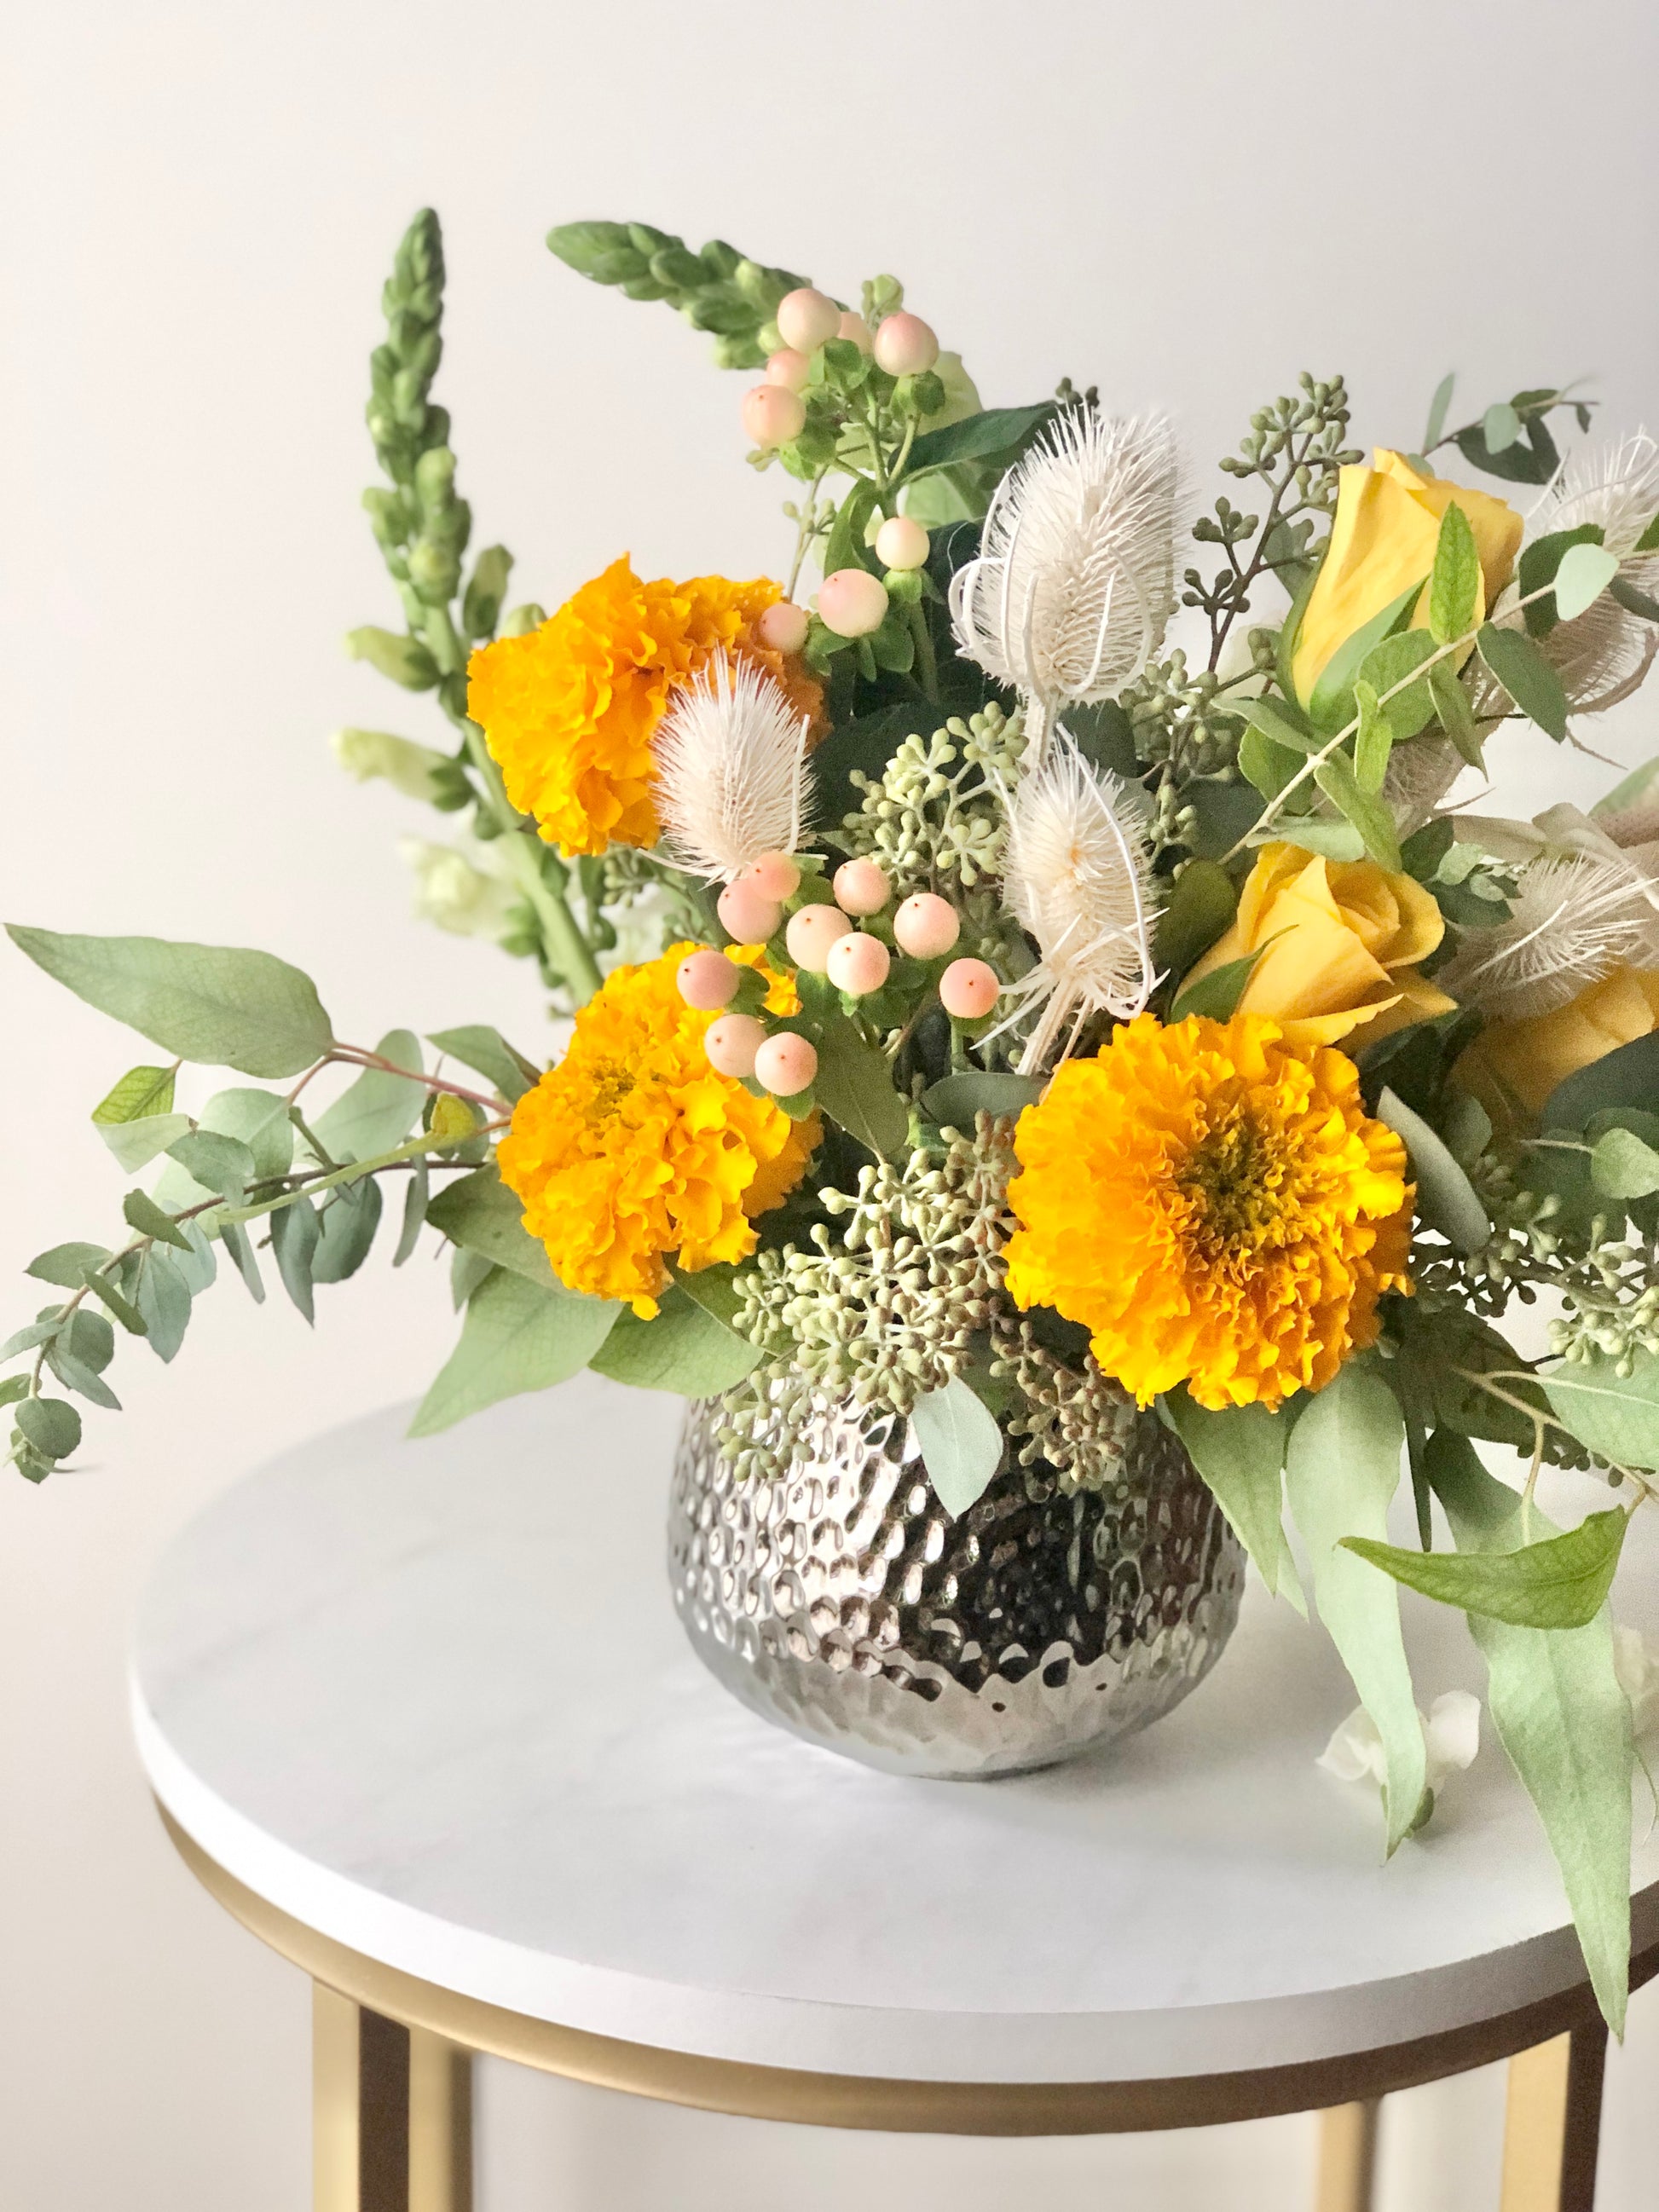 View of Marigolds in Bohemian style floral arrangement with Soft Orange, yellow, cream flowers with loose sage foliage in a luxury vase